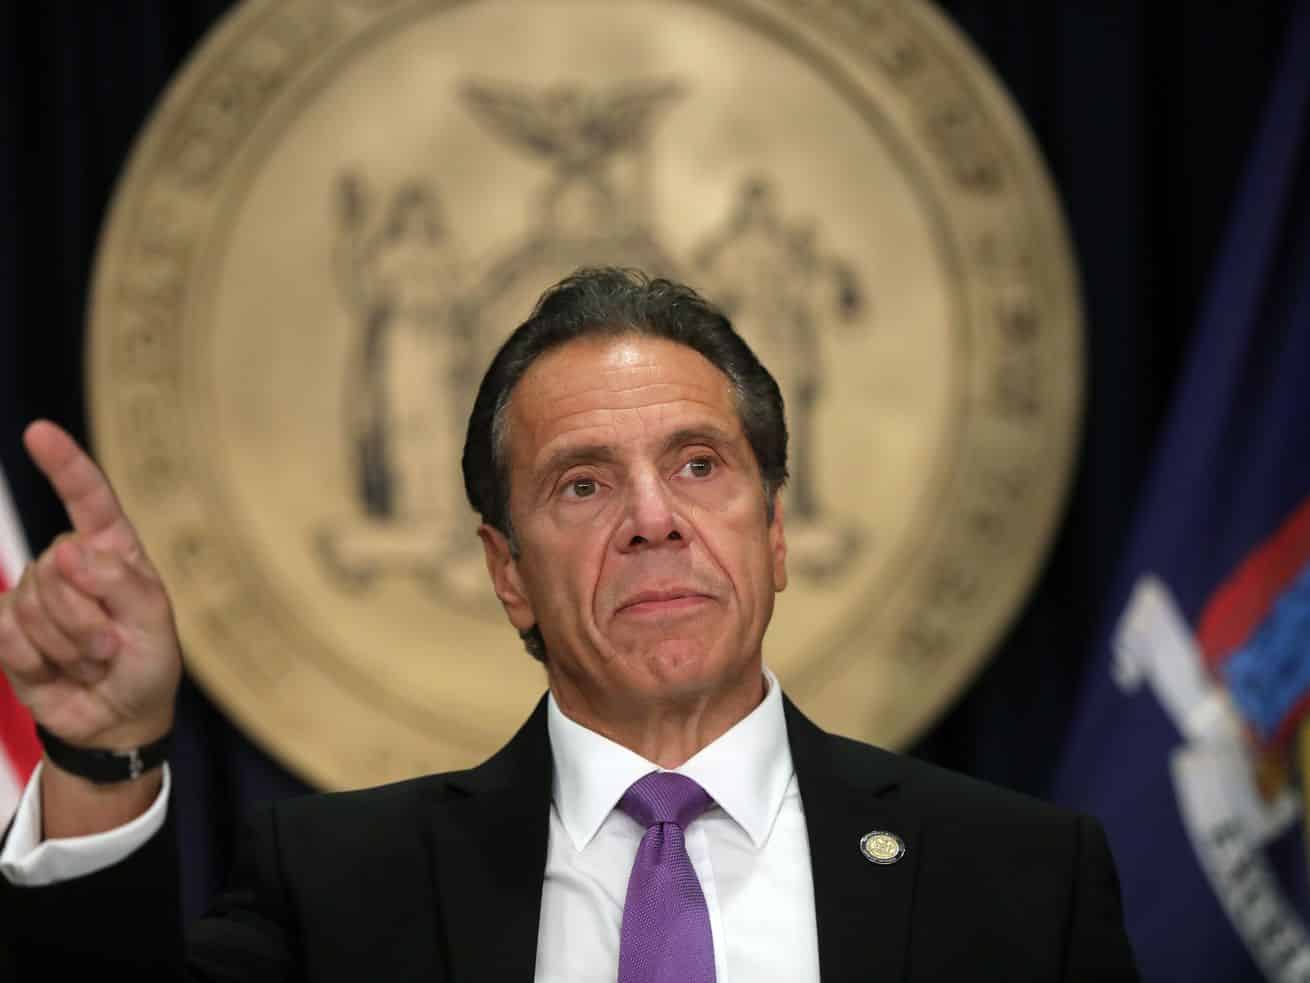 Two more women accuse New York Gov. Andrew Cuomo of sexual harassment